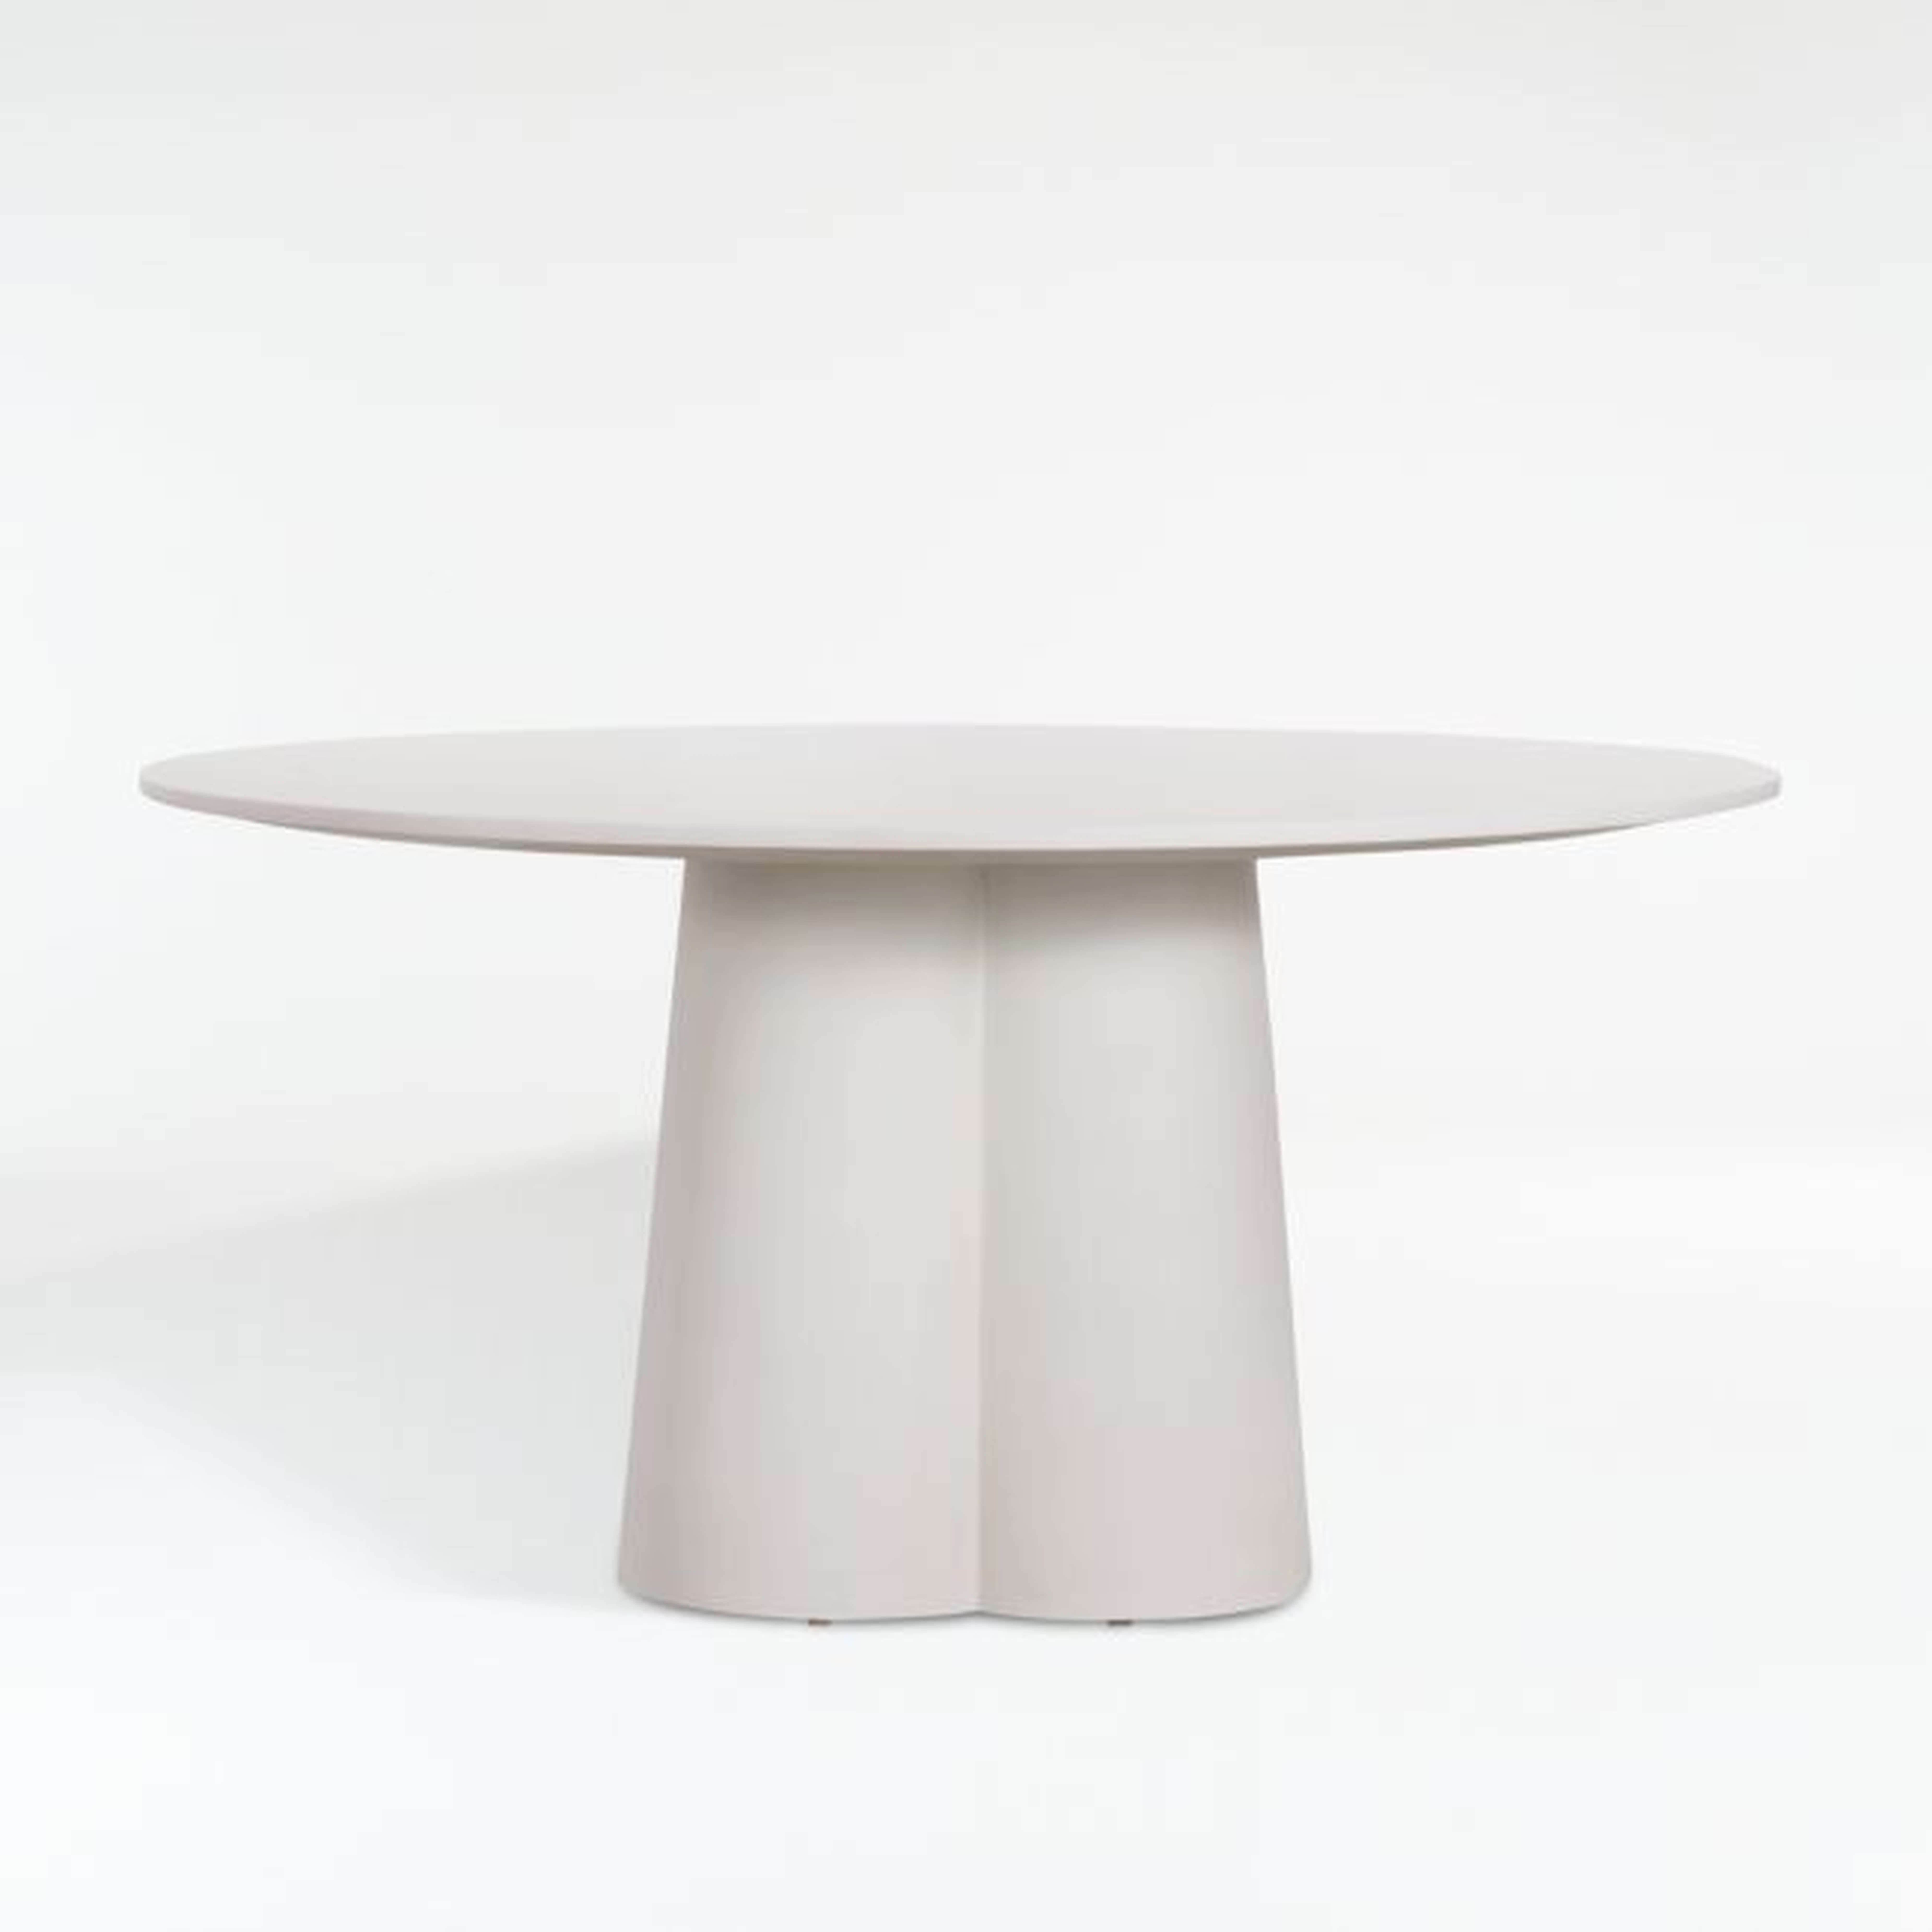 Davenport 60" Round White Dining Table - Crate and Barrel